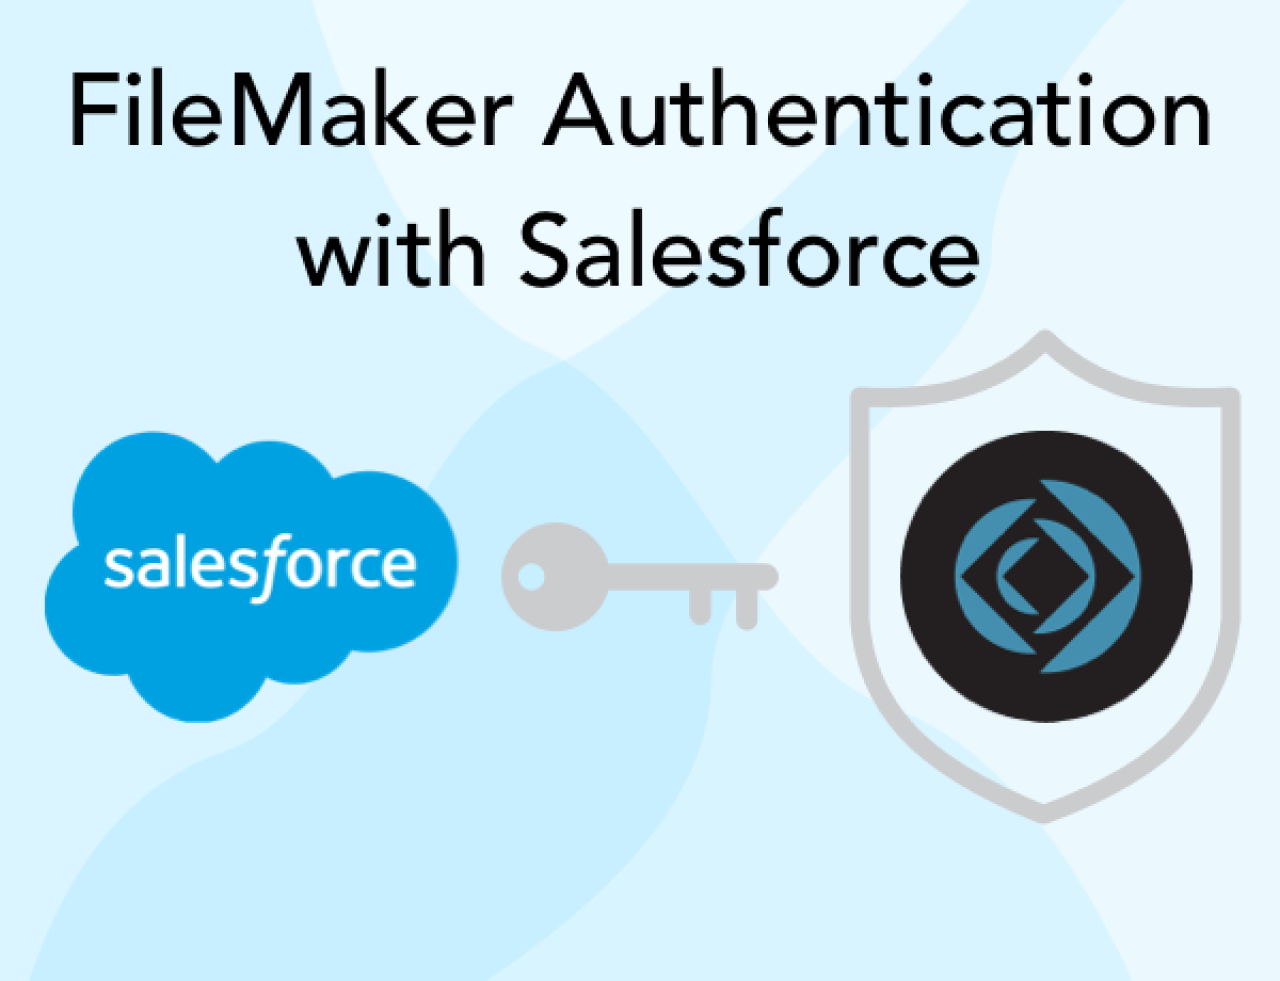 FileMaker Authentication with Salesforce.